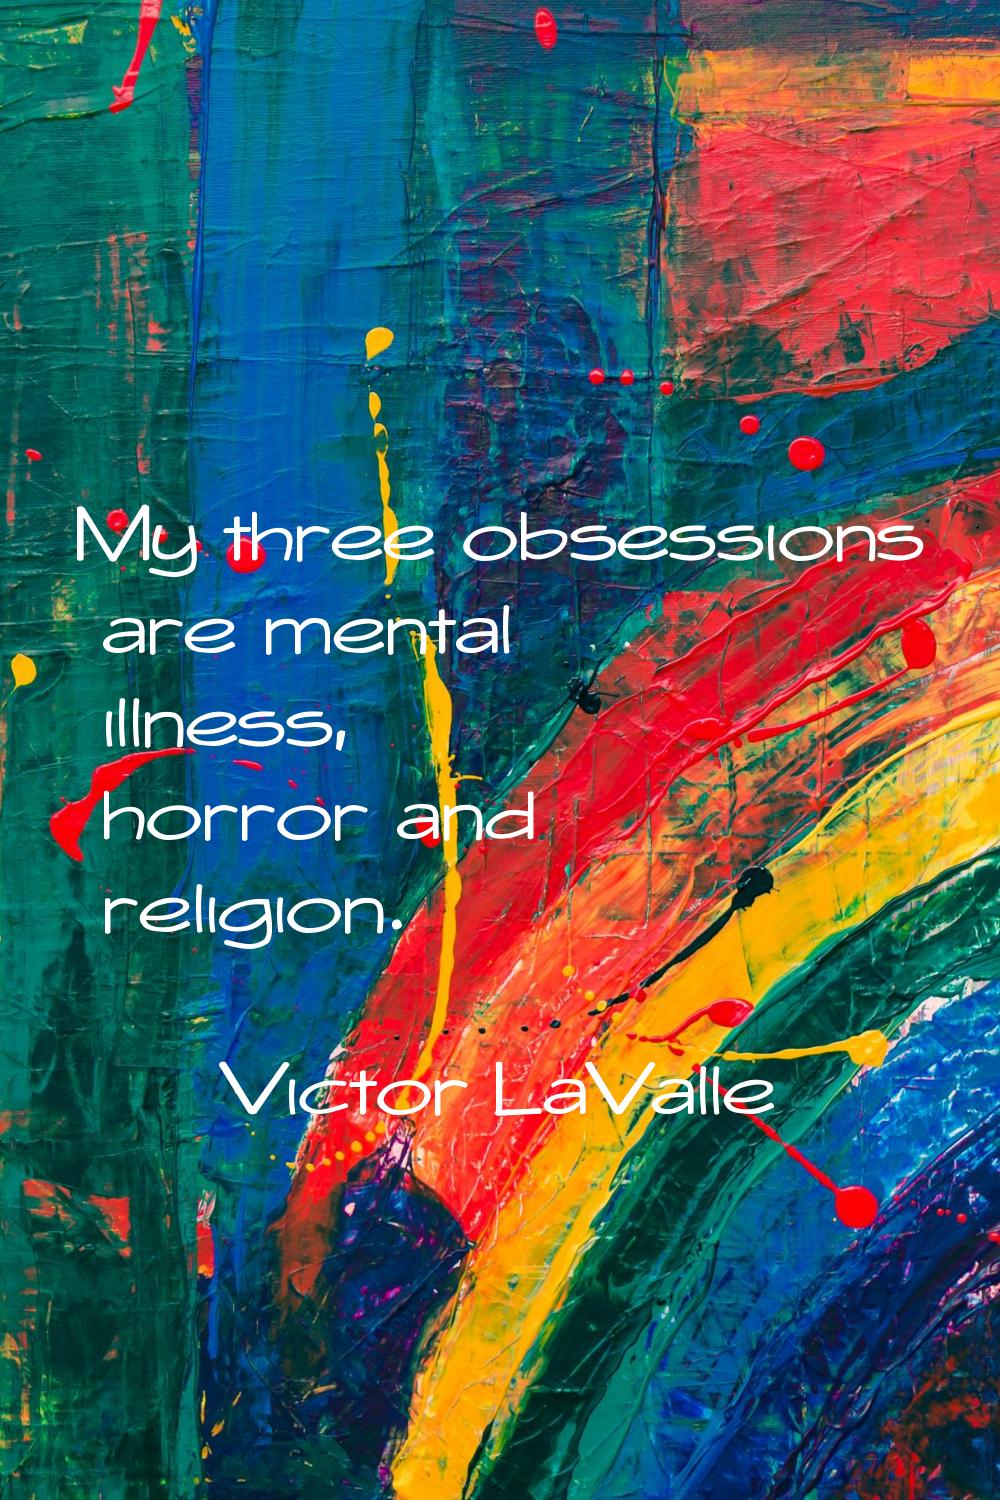 My three obsessions are mental illness, horror and religion.